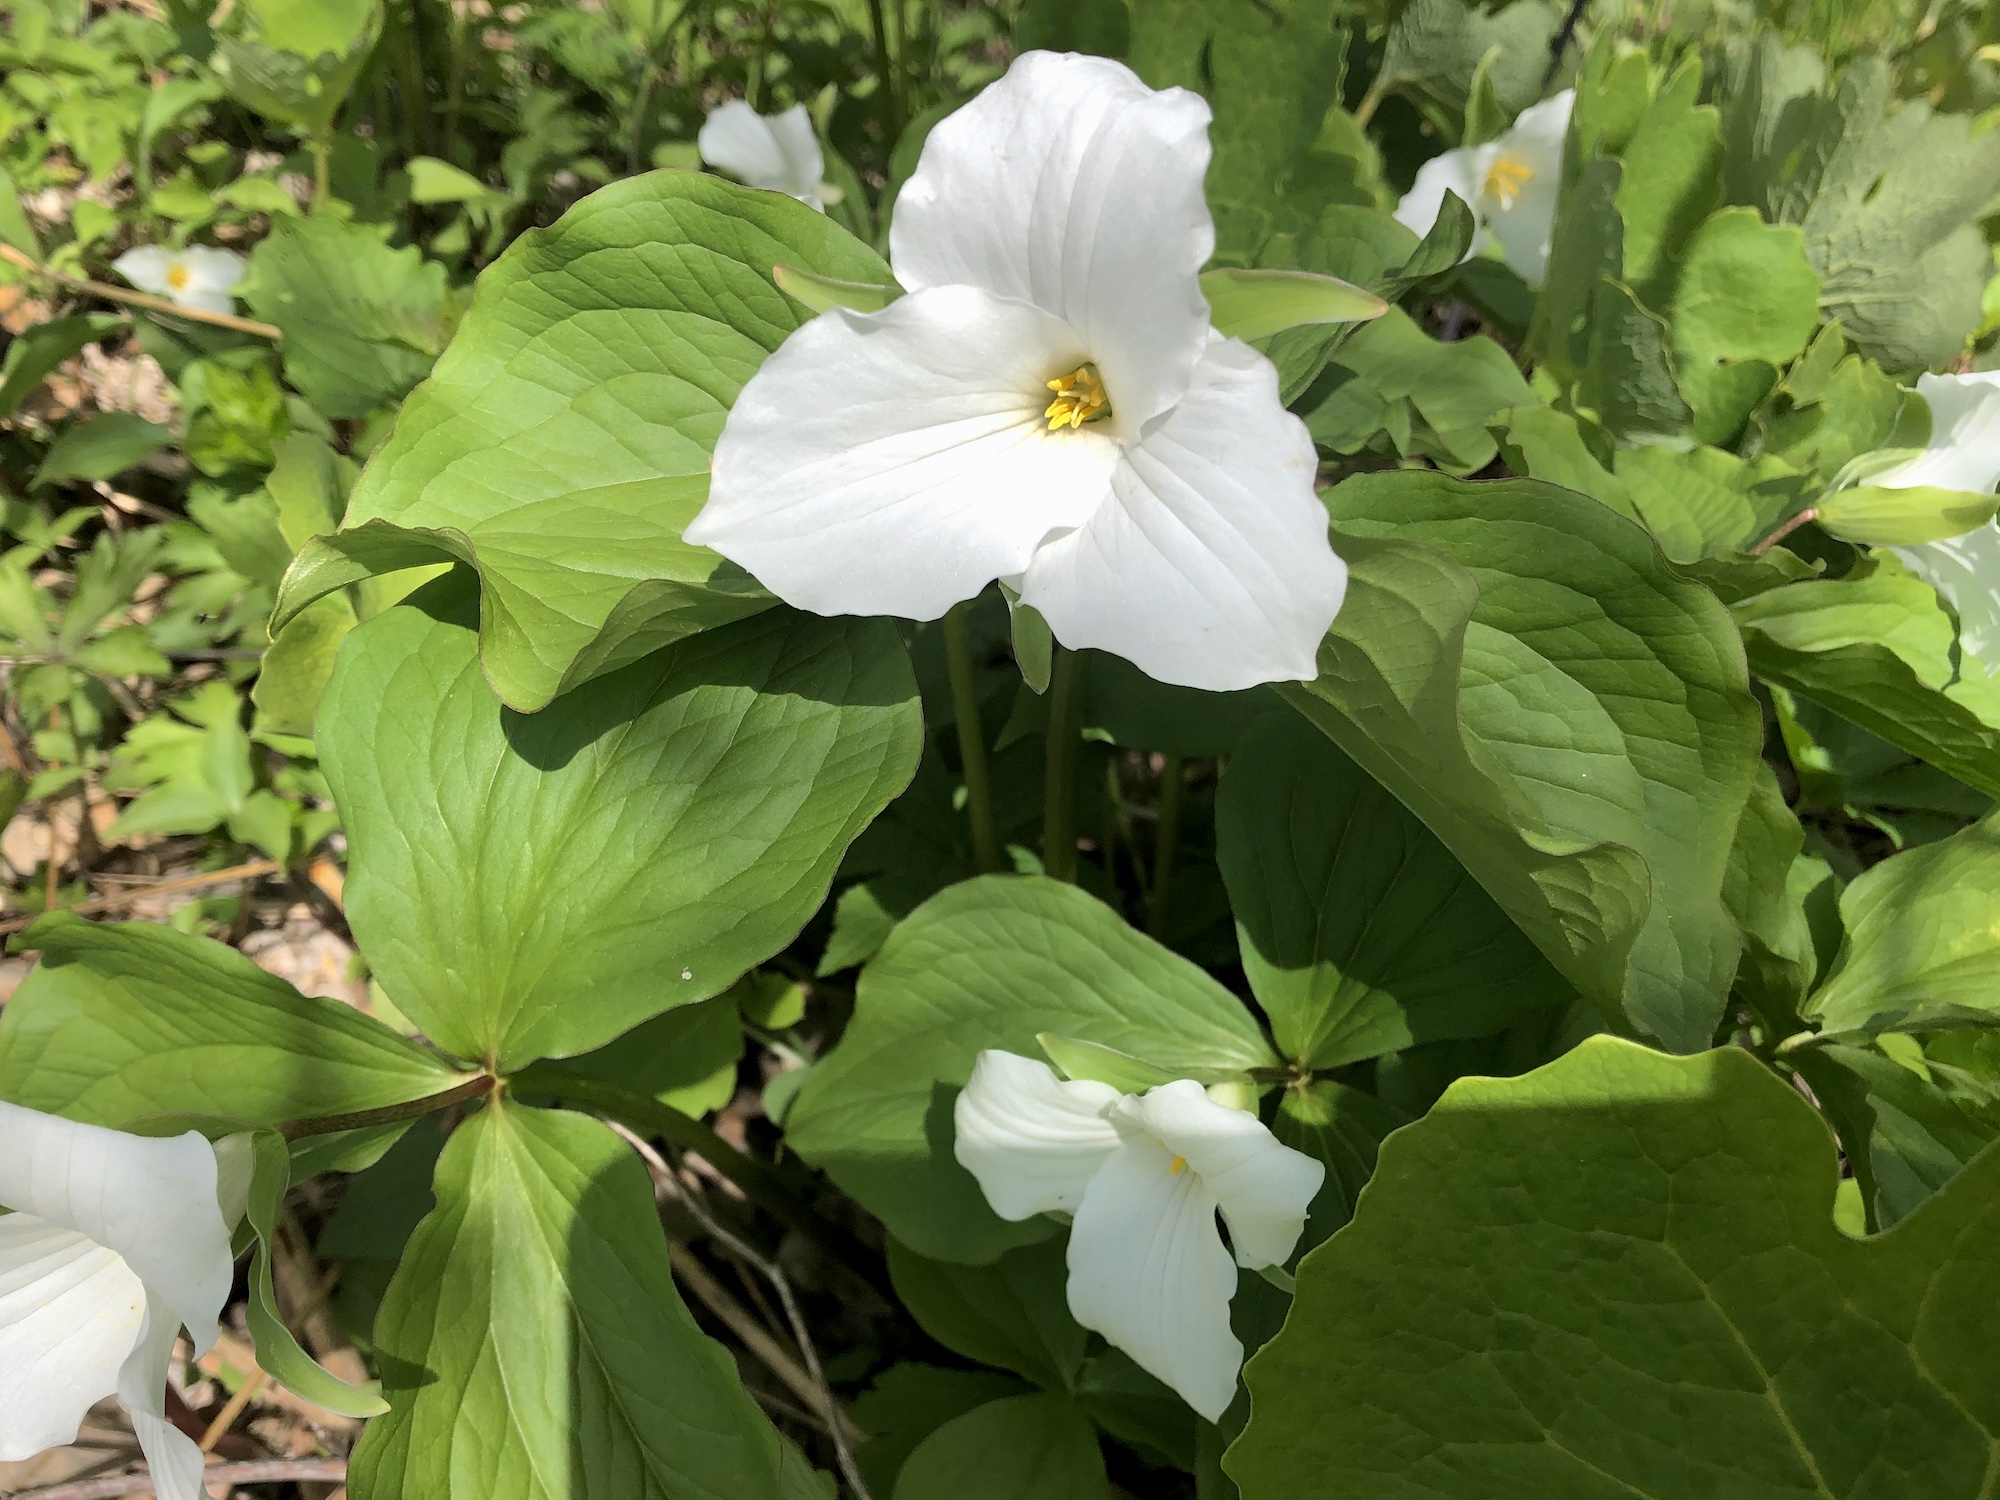 Great White Trillium near Council Ring Spring in Madison, Wisconsin on May 7, 2019.